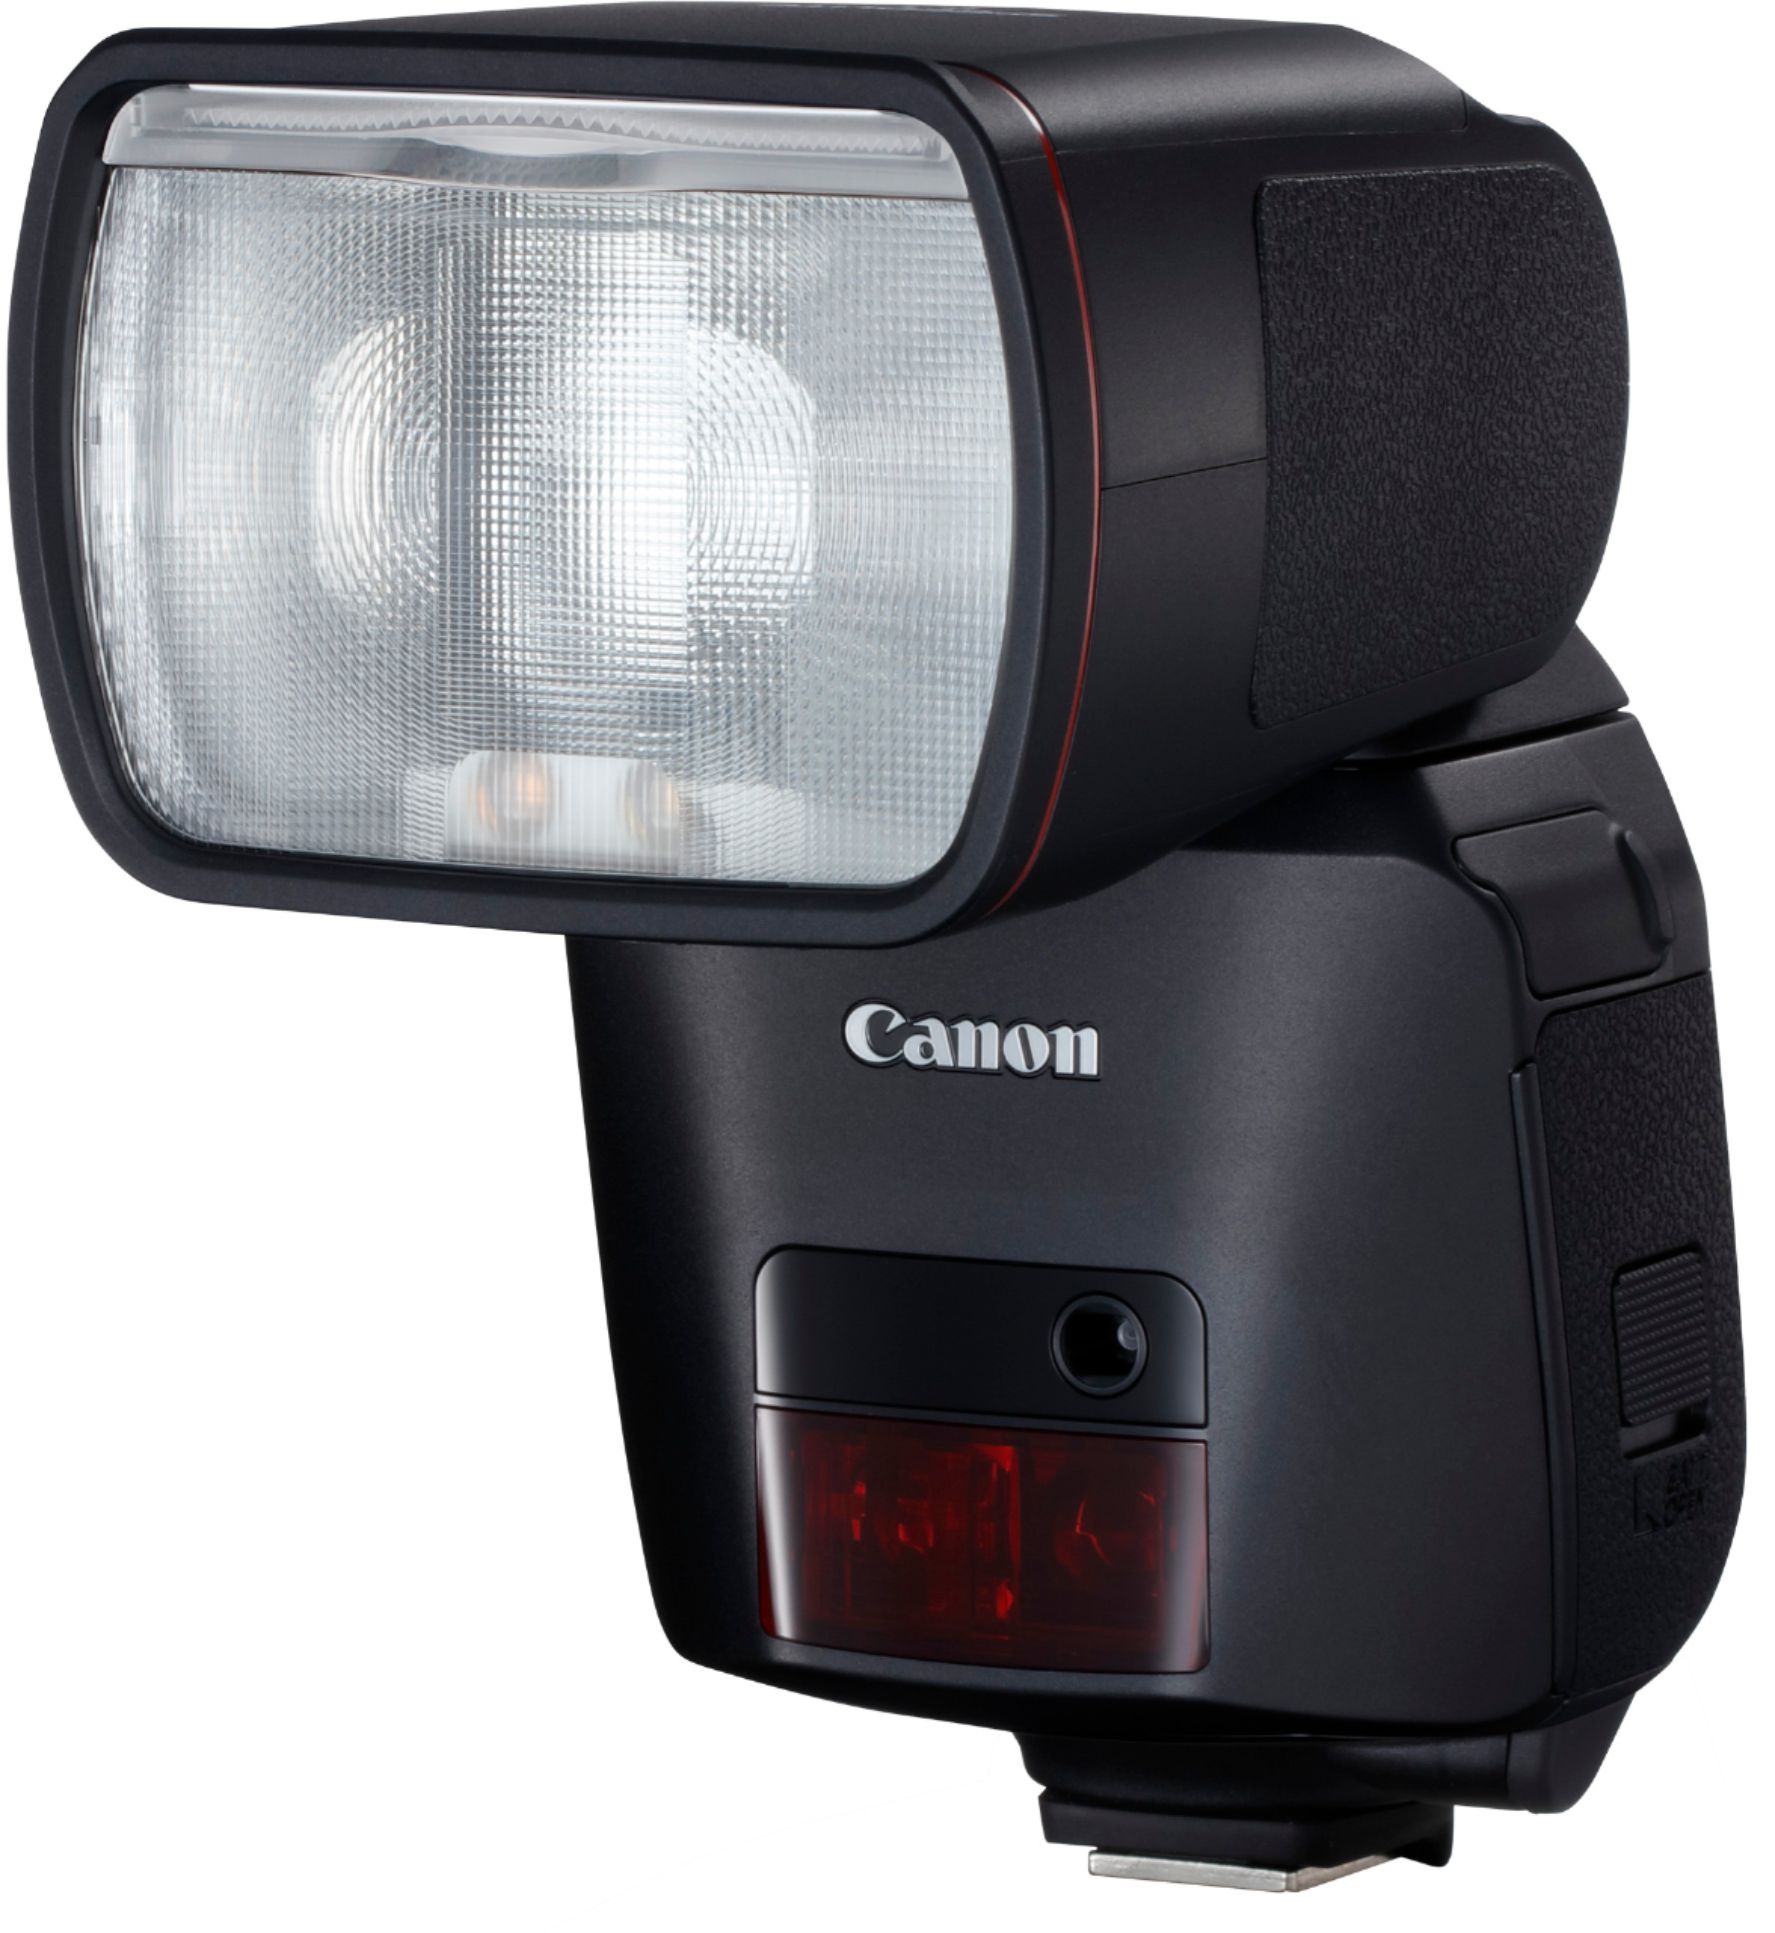 Canon Speedlite Flashes Are Named After Their Guide Numbers